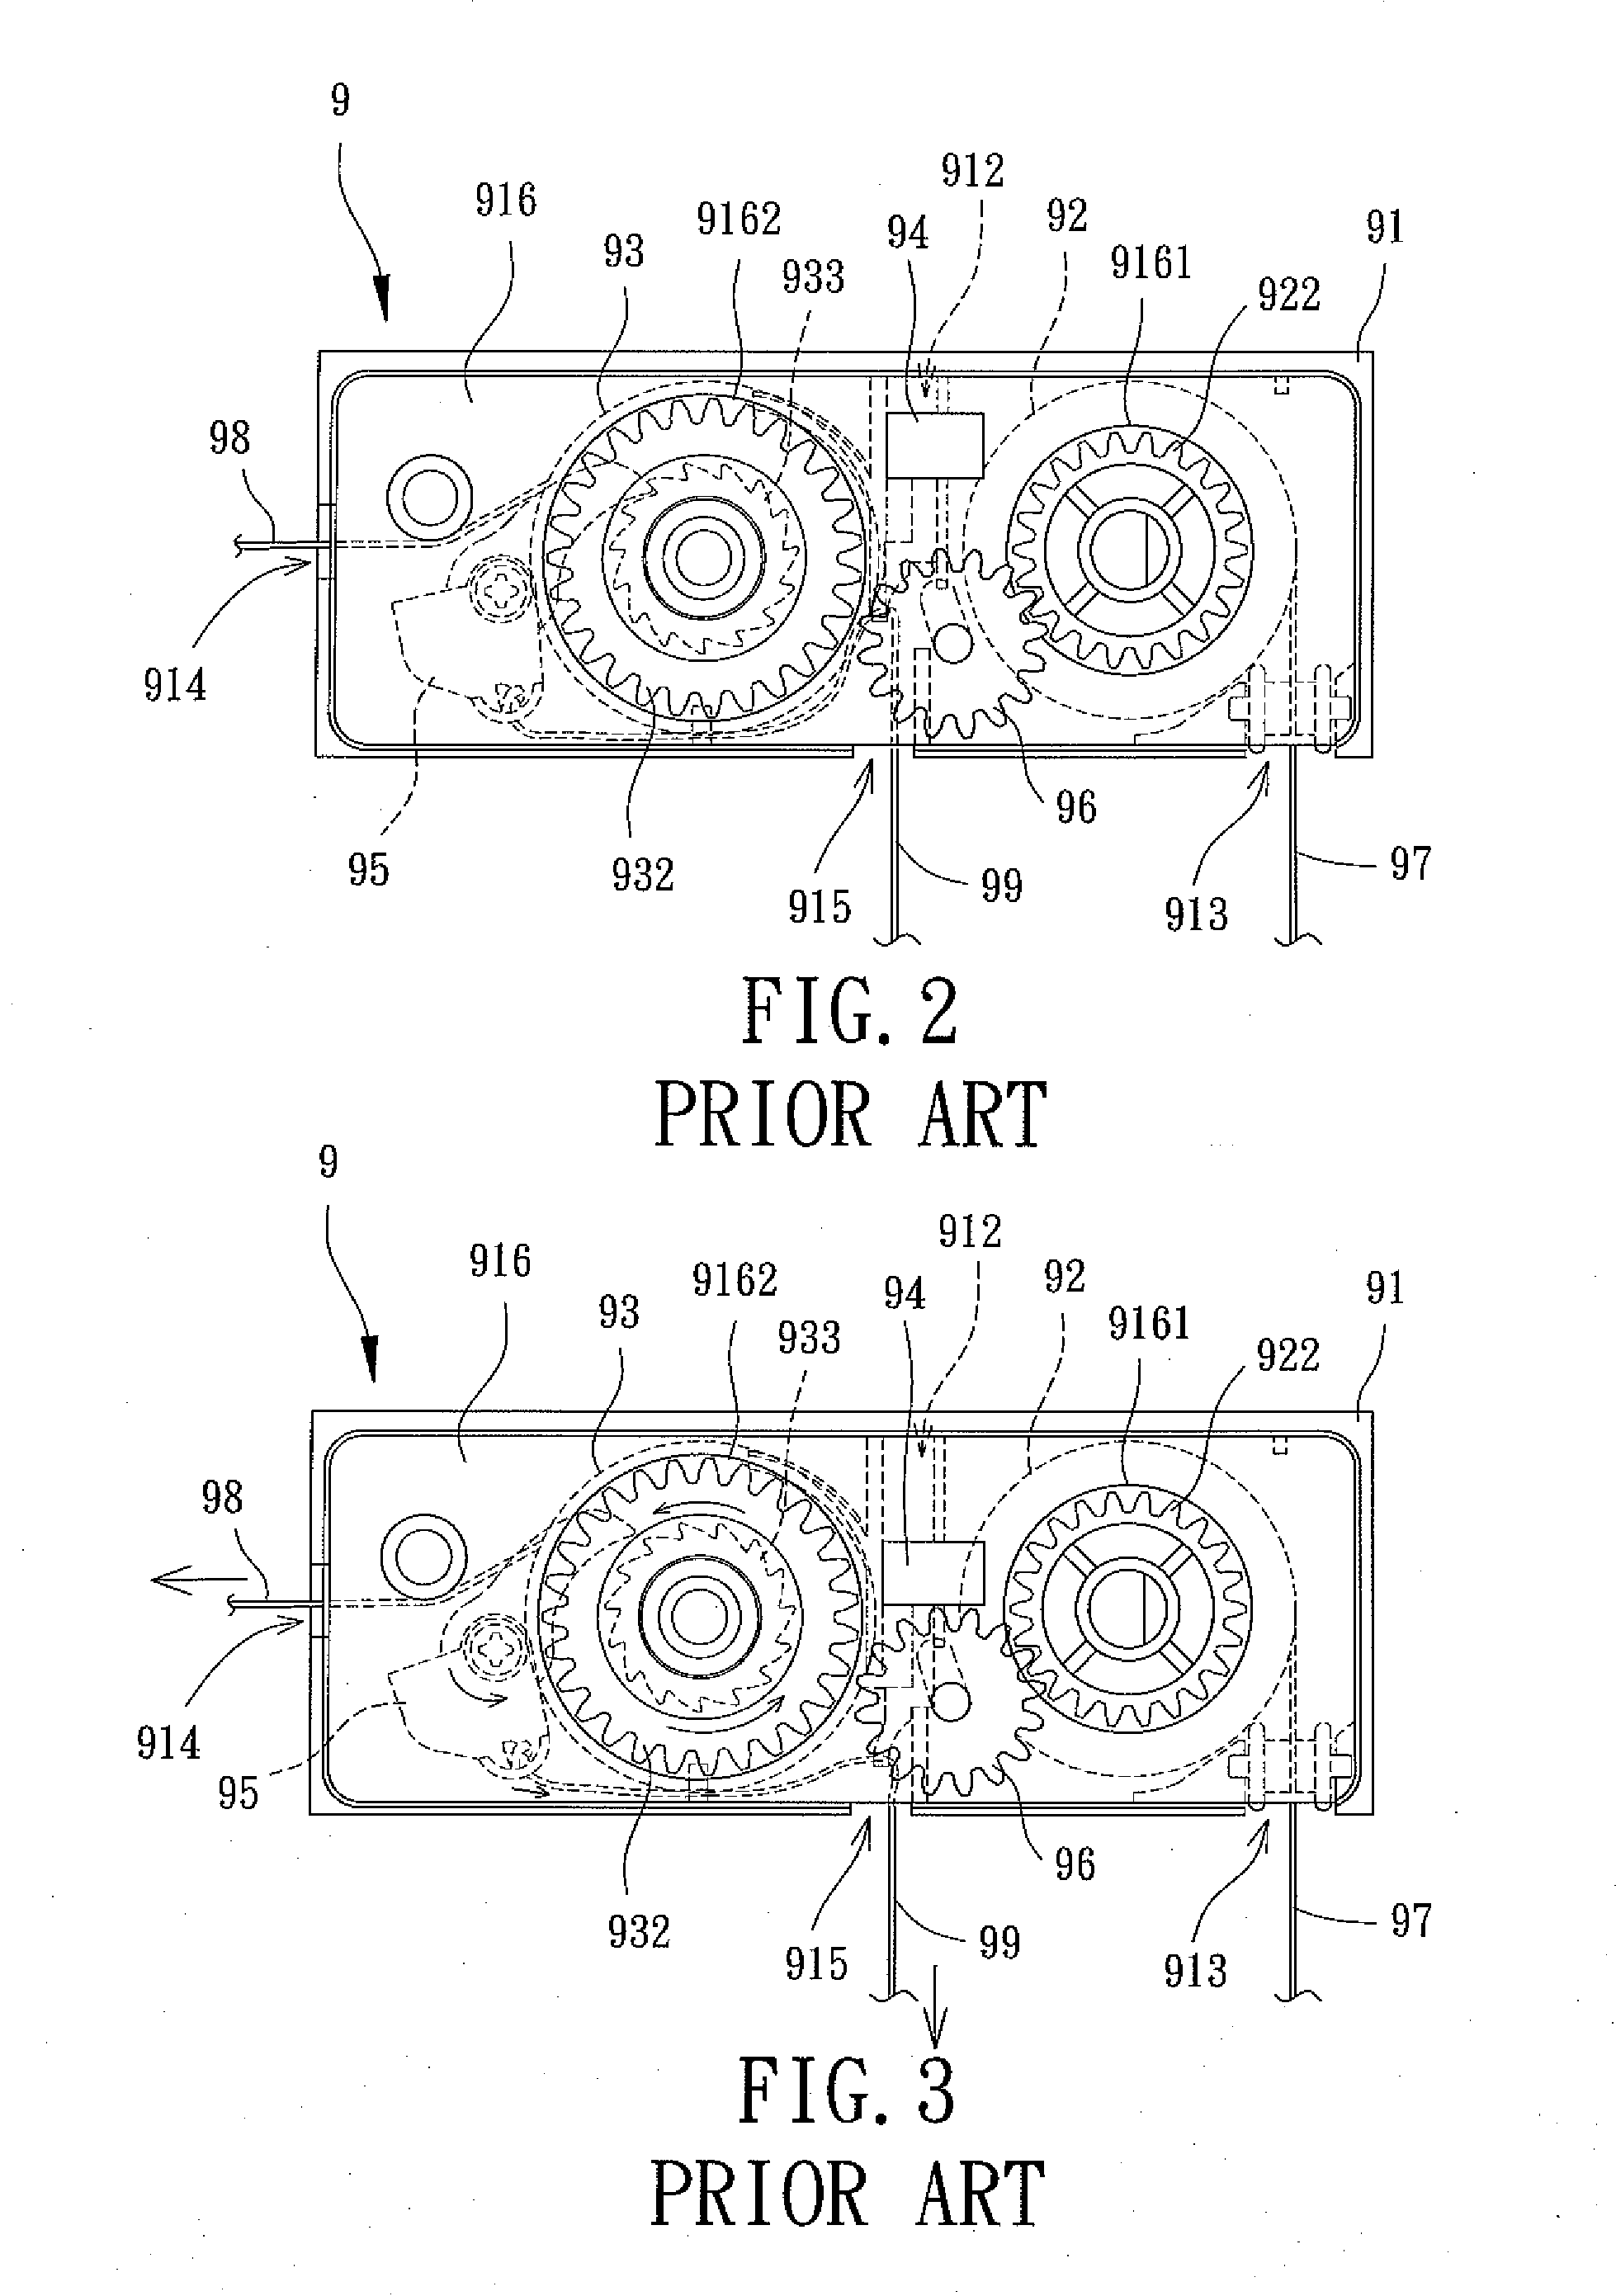 Control Device for folding/unfolding Window Shade